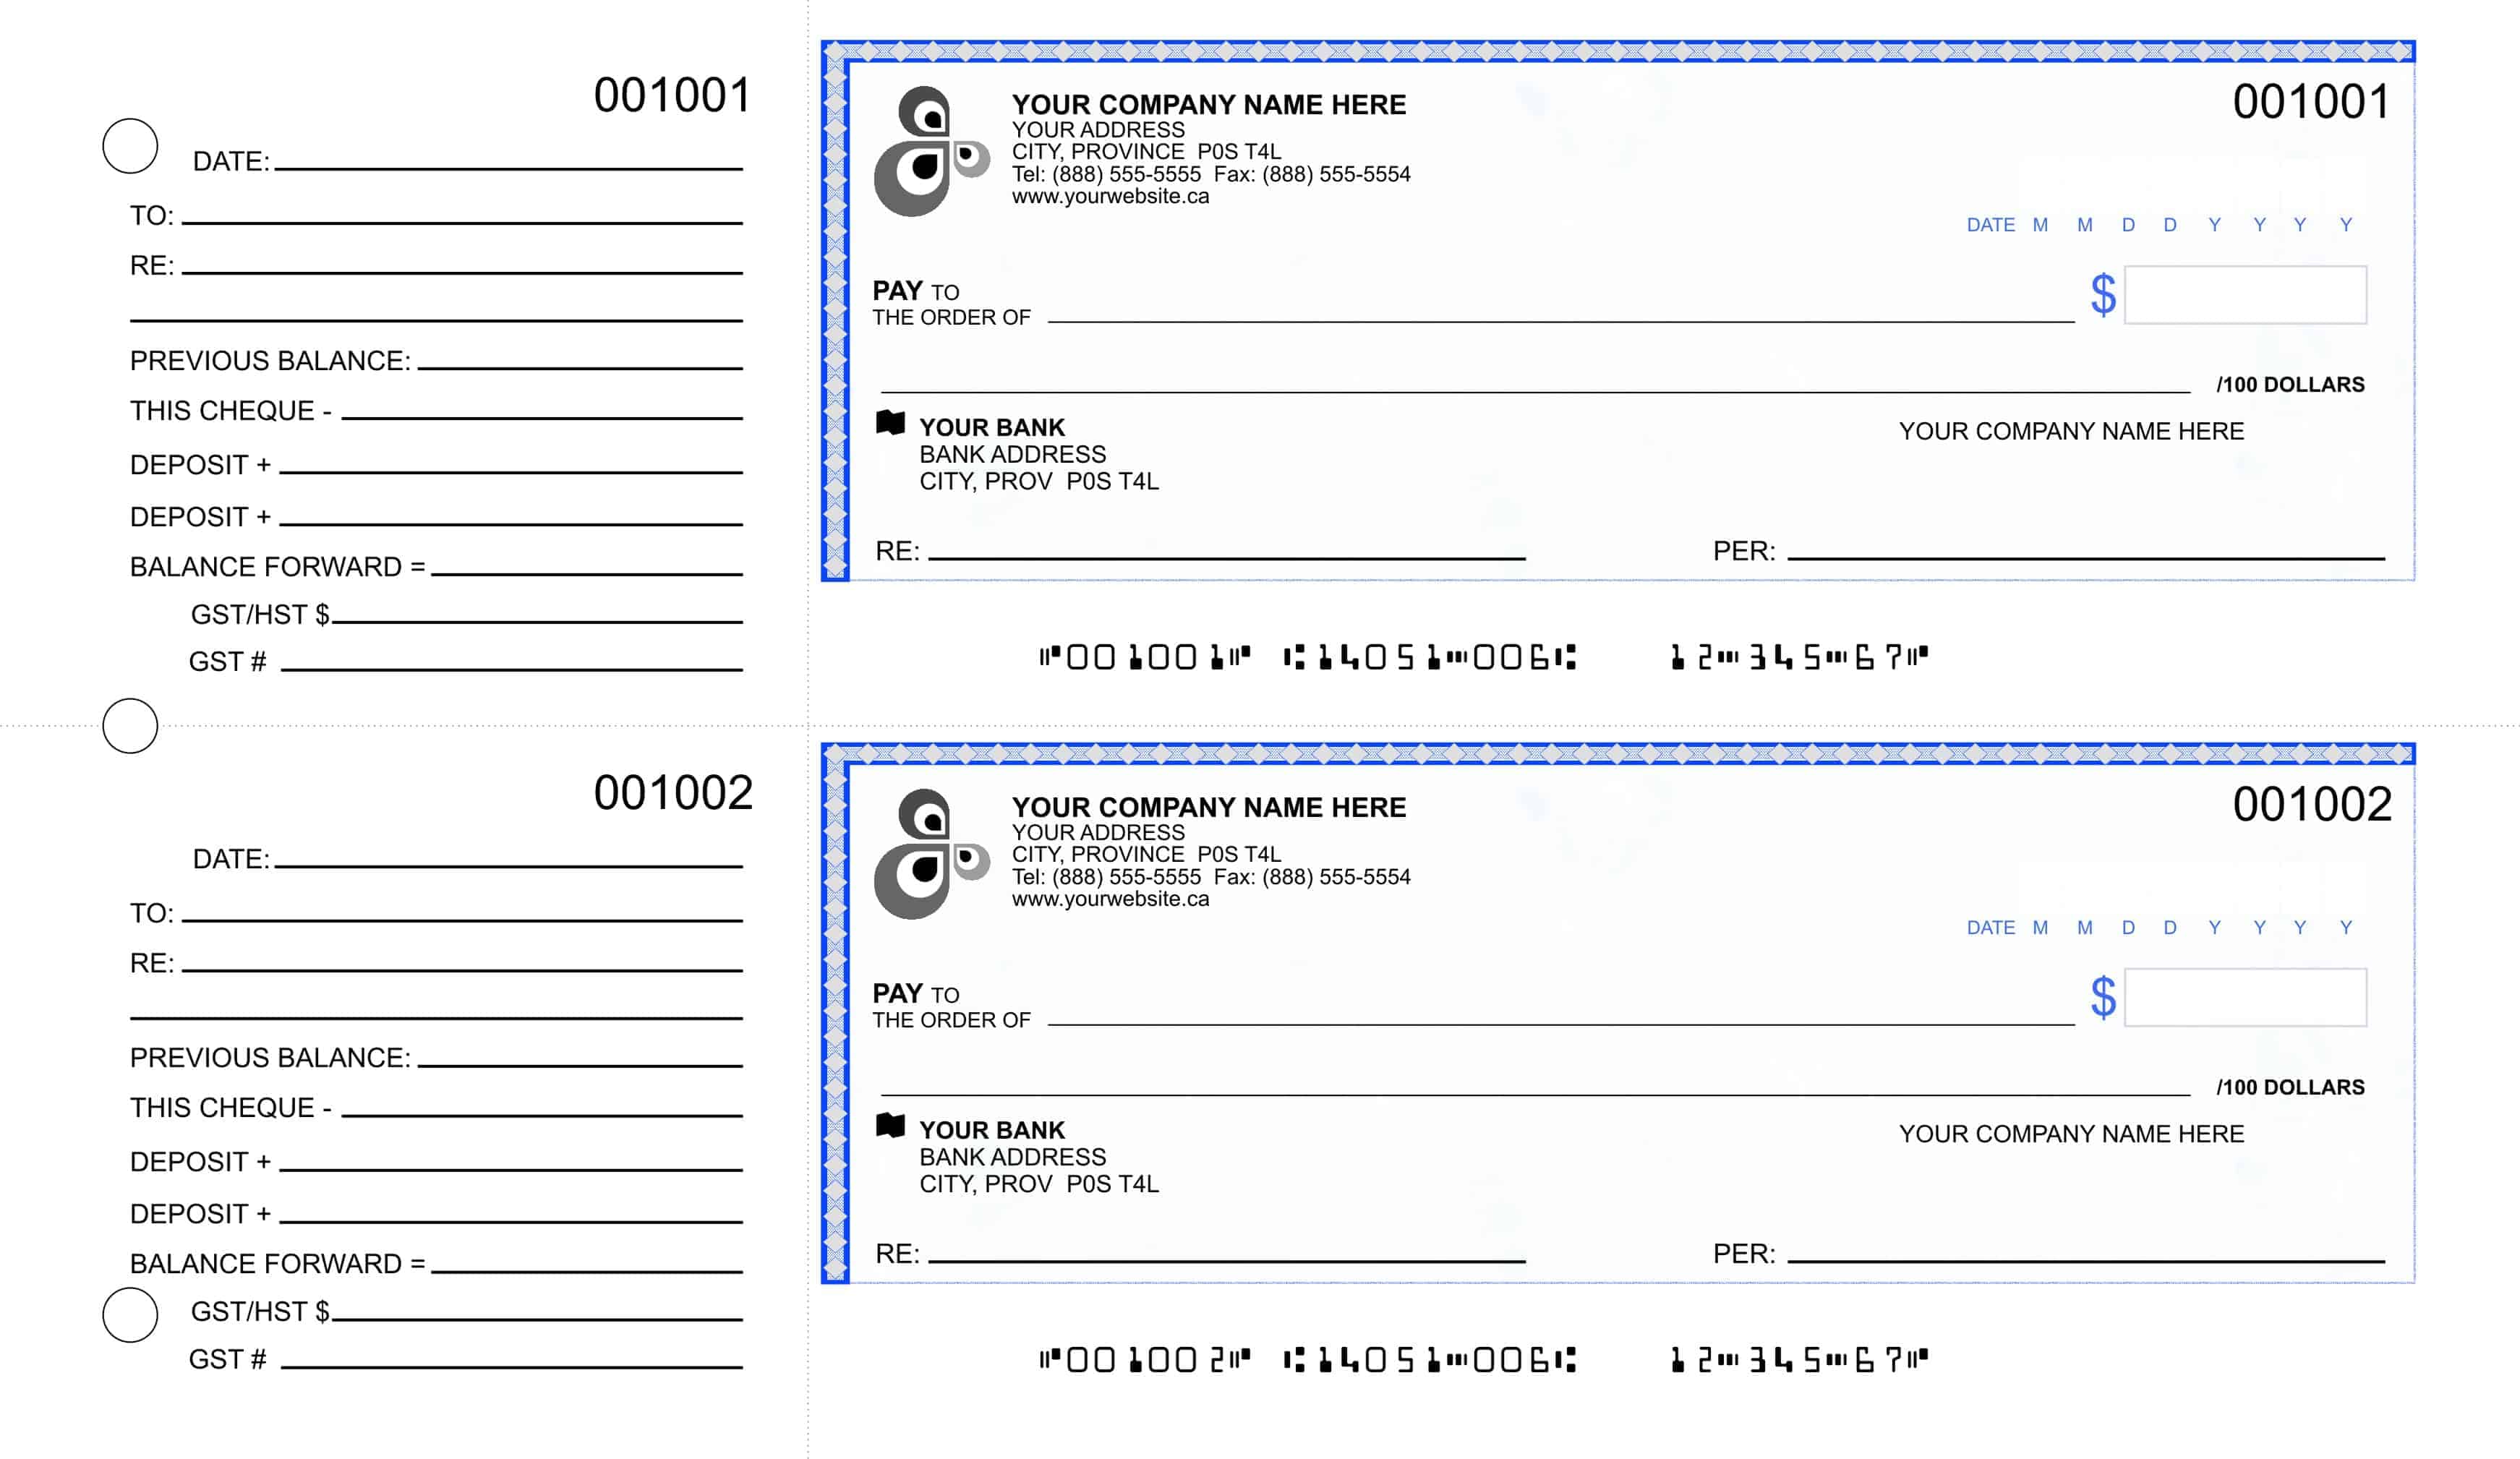 Manual Cheques with Black & White Logo Added